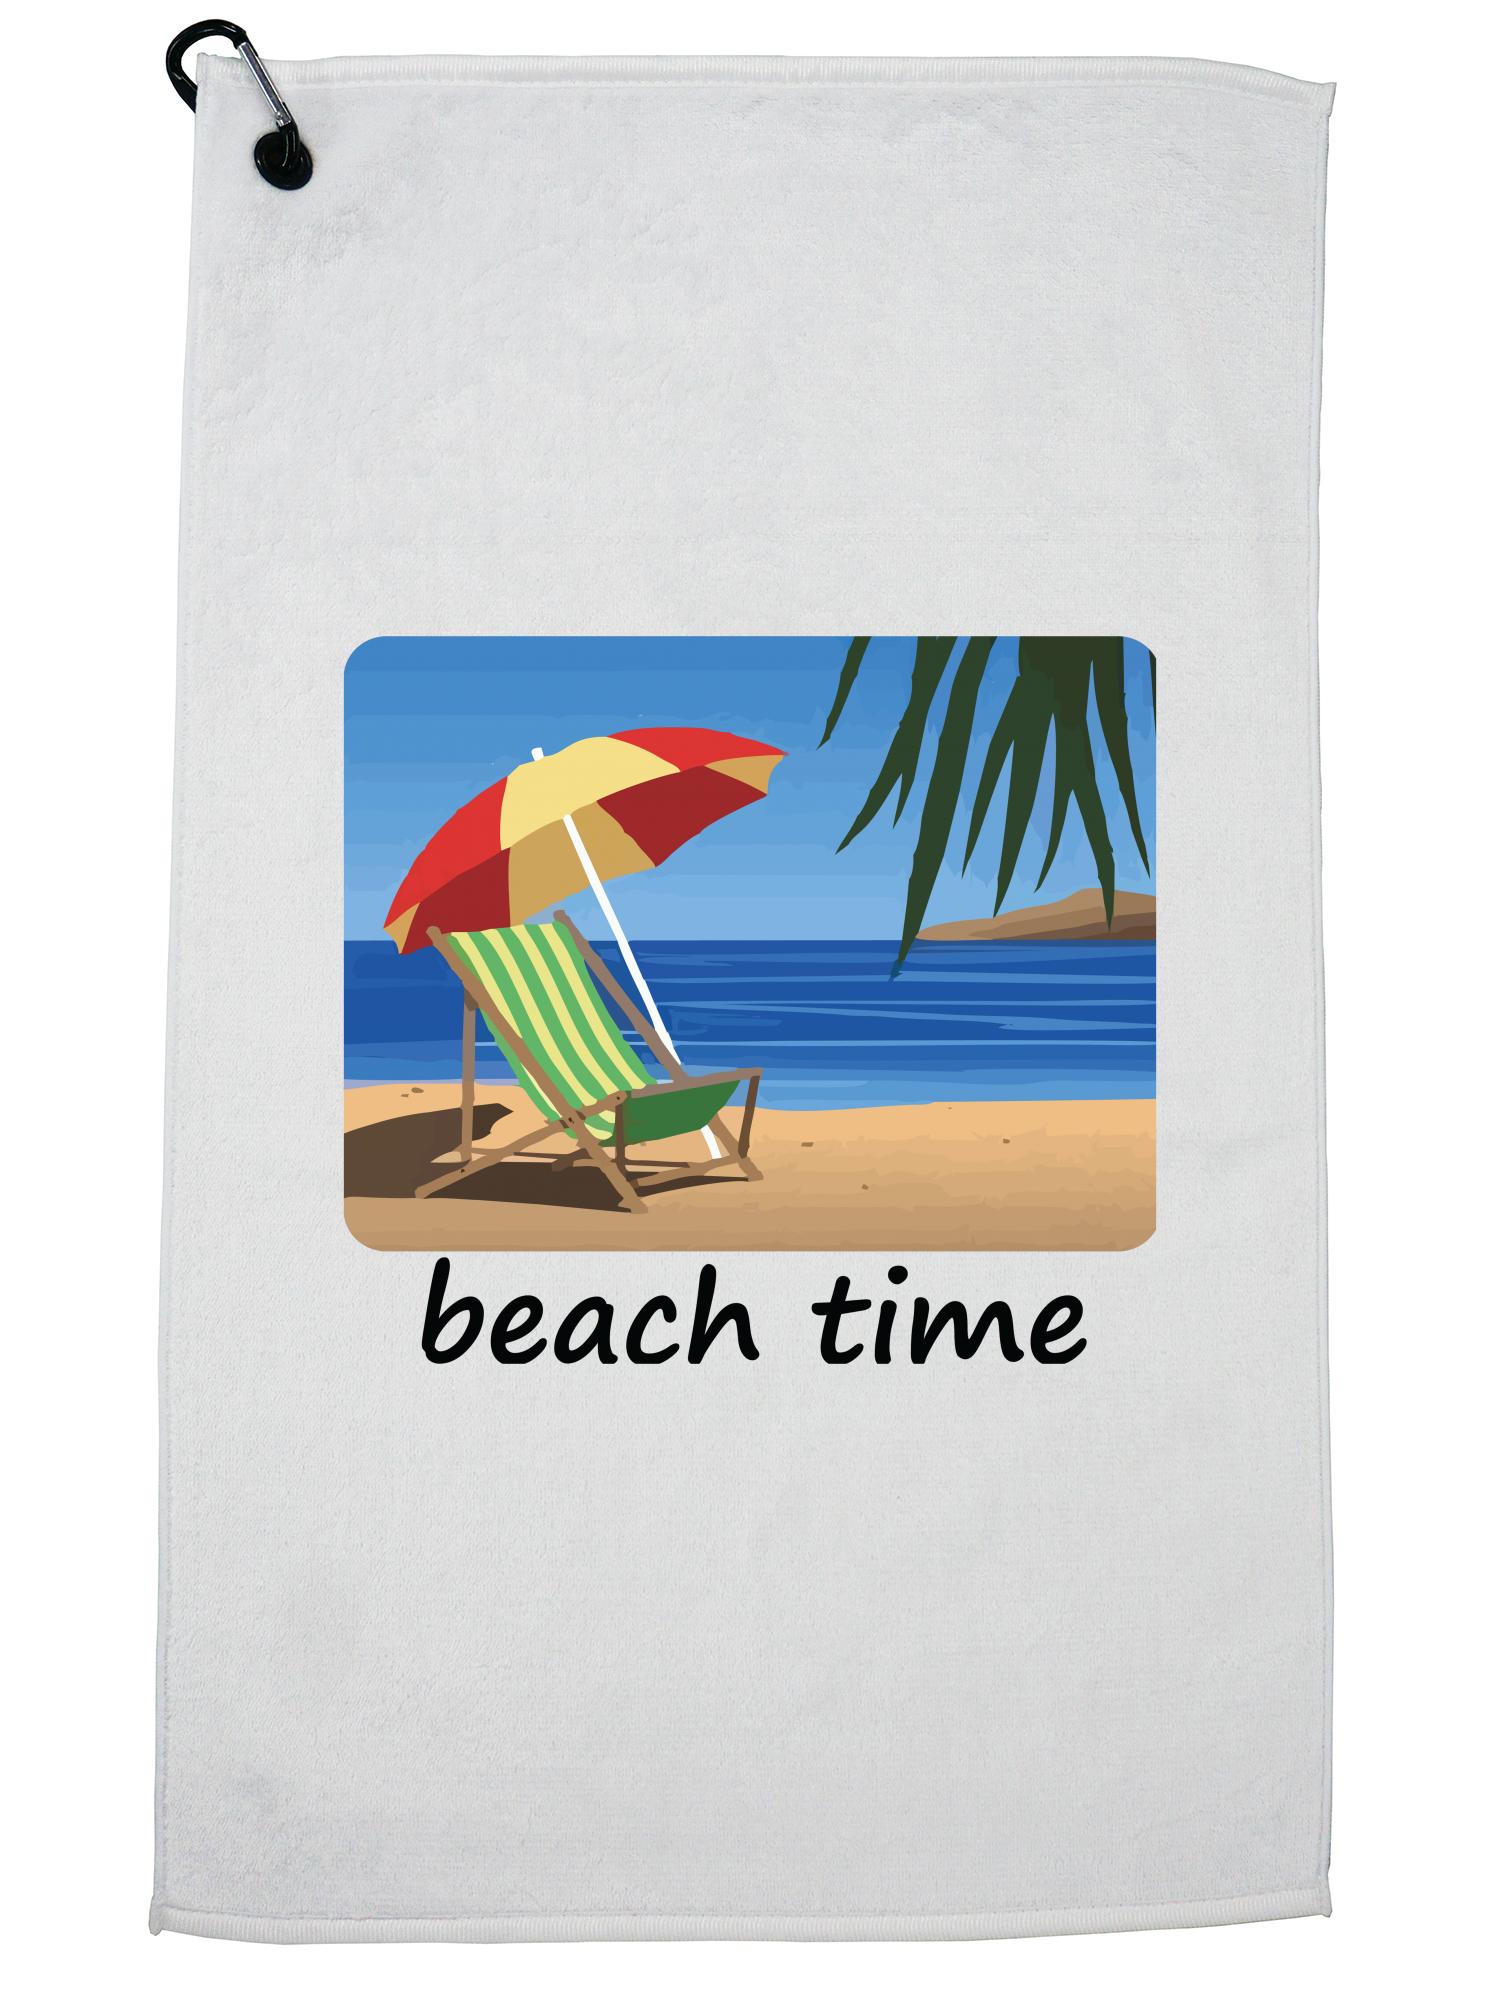 Beach Time - Chair In Sand Vacation Design Golf Towel with Carabiner Clip - image 1 of 5